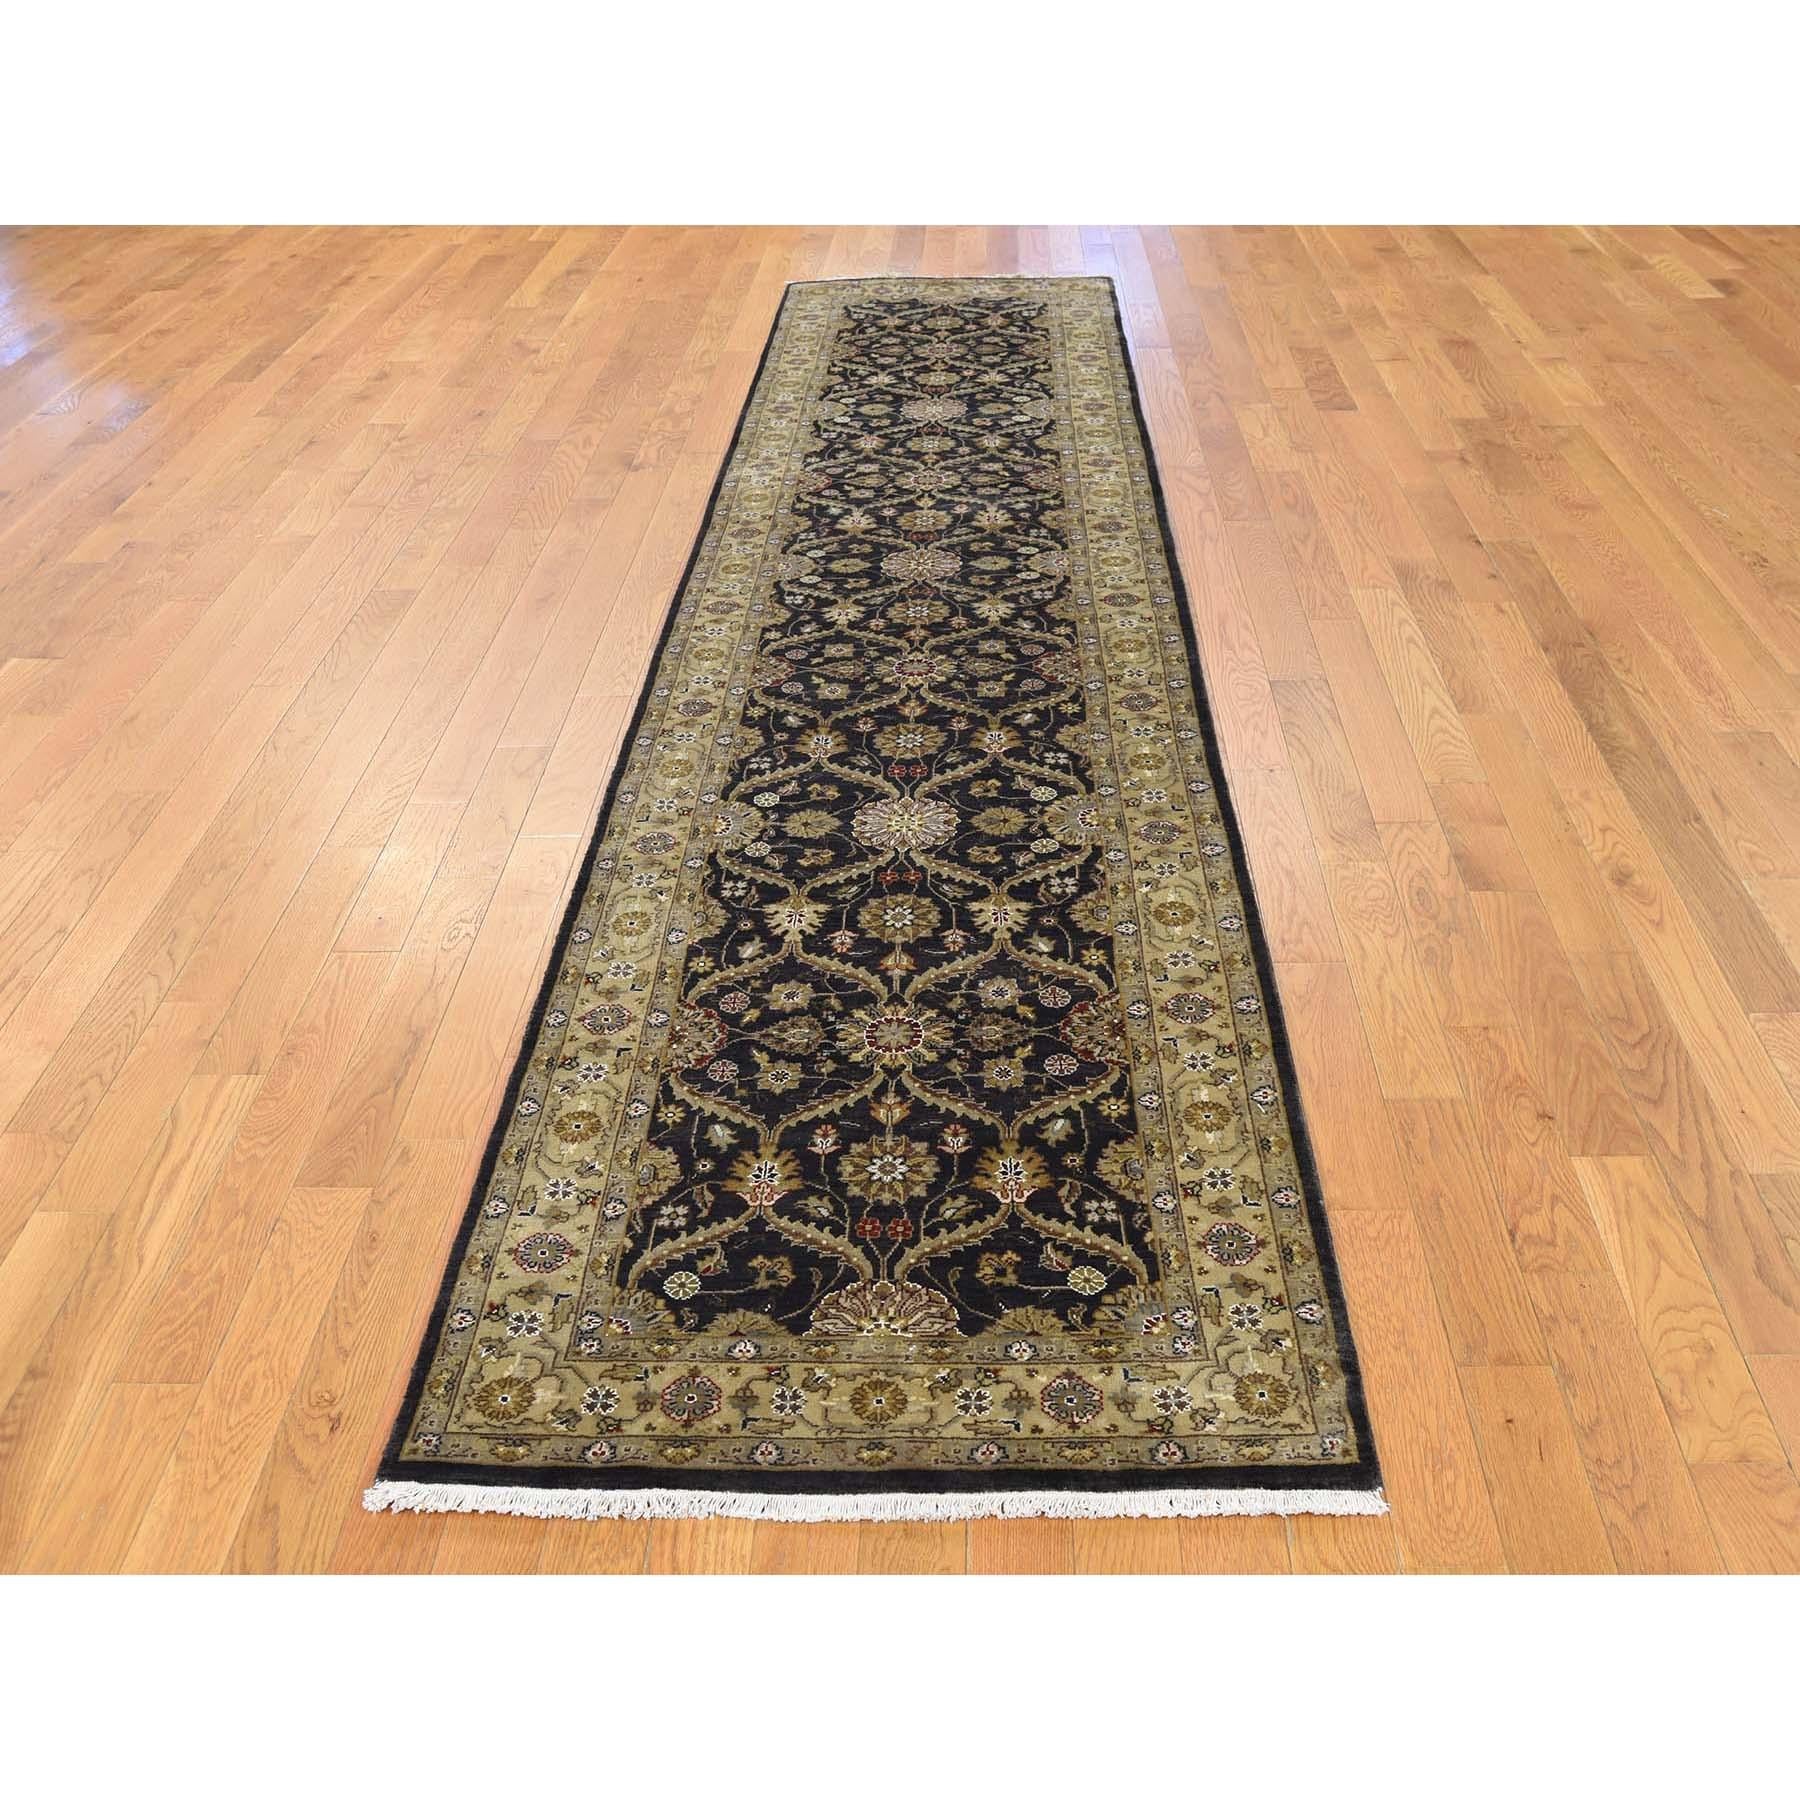 This is a truly genuine one-of-a-kind Hereke design wool and silk hand knotted 300 Kpsi runner rug. It has been knotted for months and months in the centuries-old Persian weaving craftsmanship techniques by expert artisans. Measures: 2'8